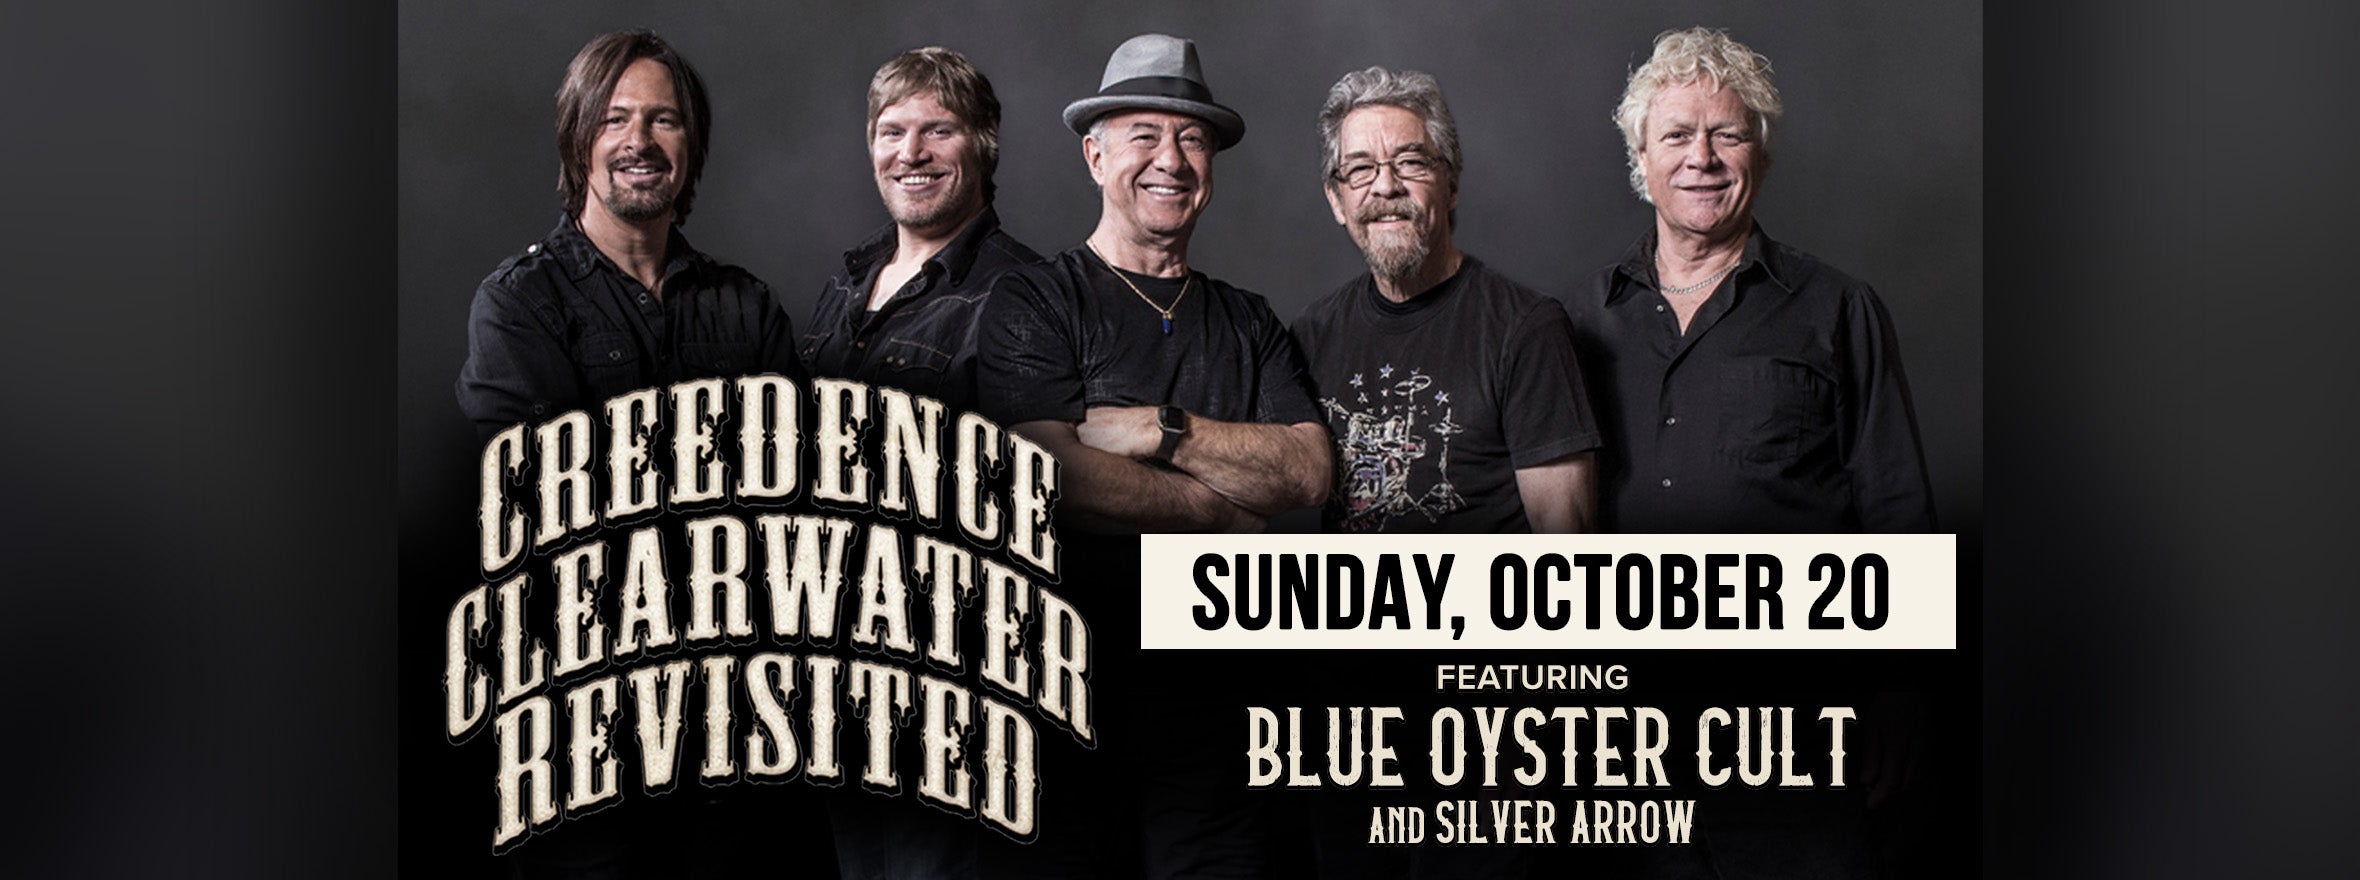 CREEDENCE CLEARWATER REVISITED TO HIT UTICA